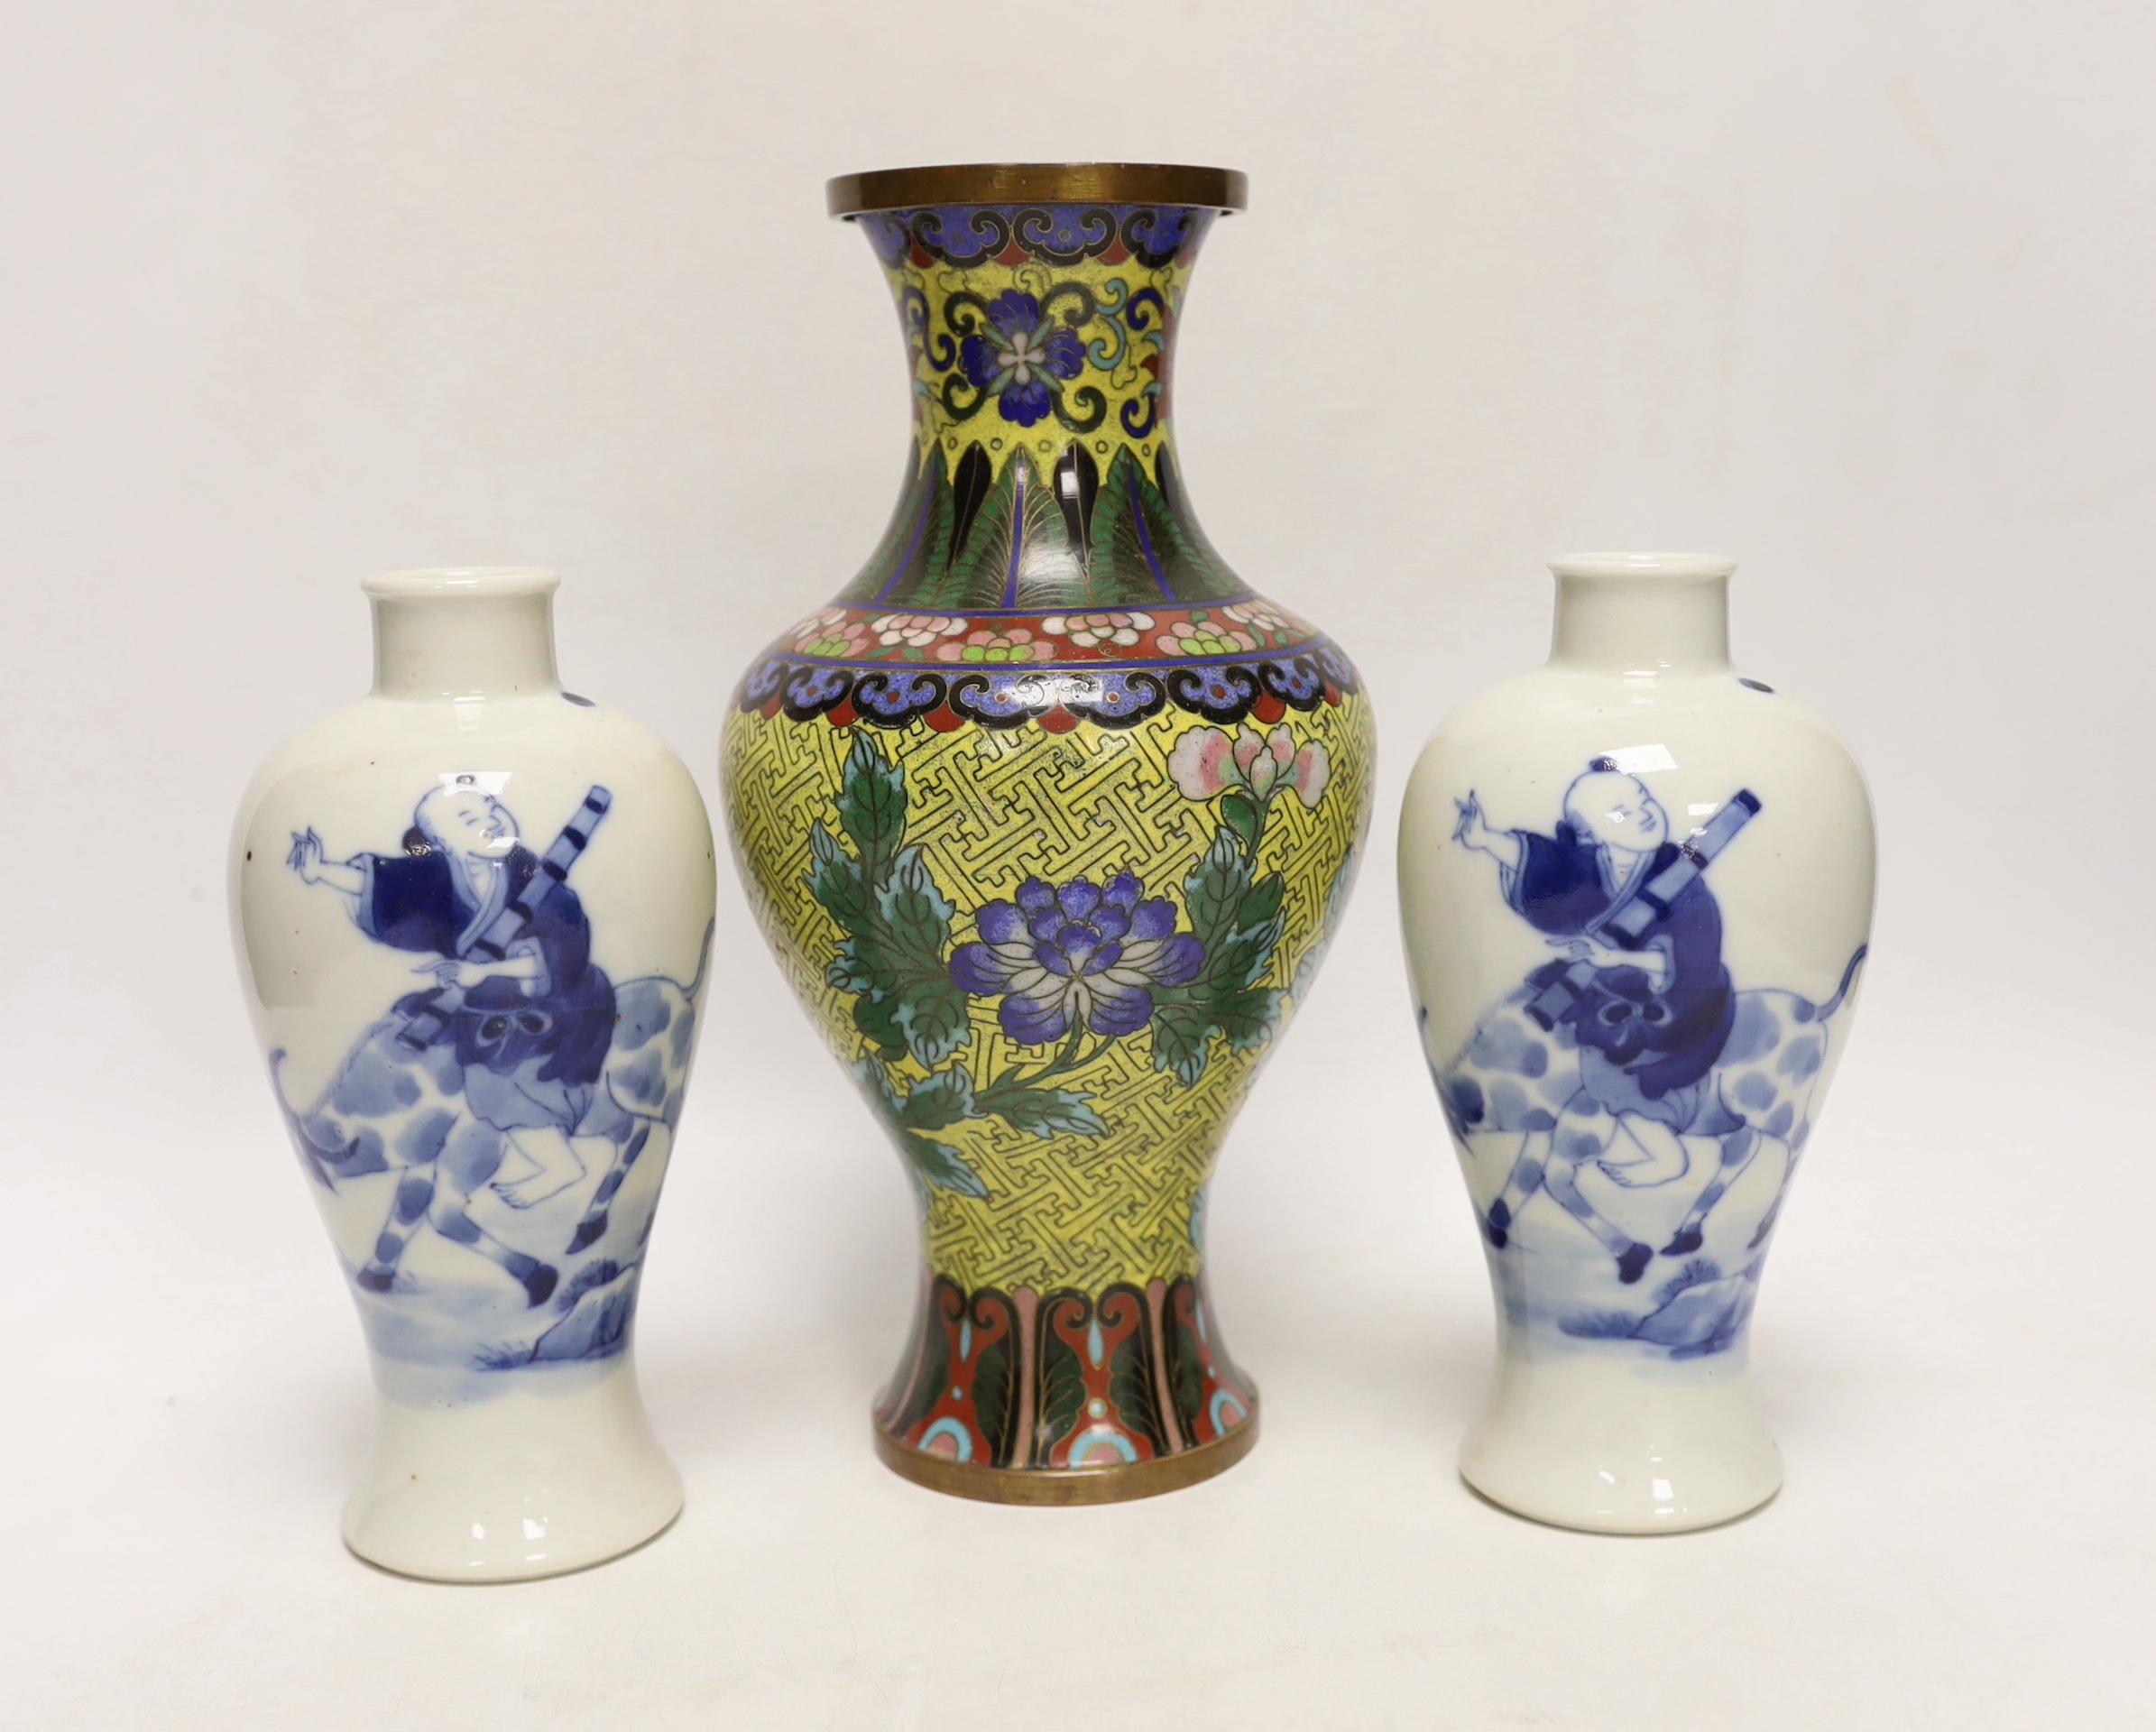 A pair of Chinese blue and white vases, c.1900 and a Chinese cloisonné enamel vase, largest 24cm high